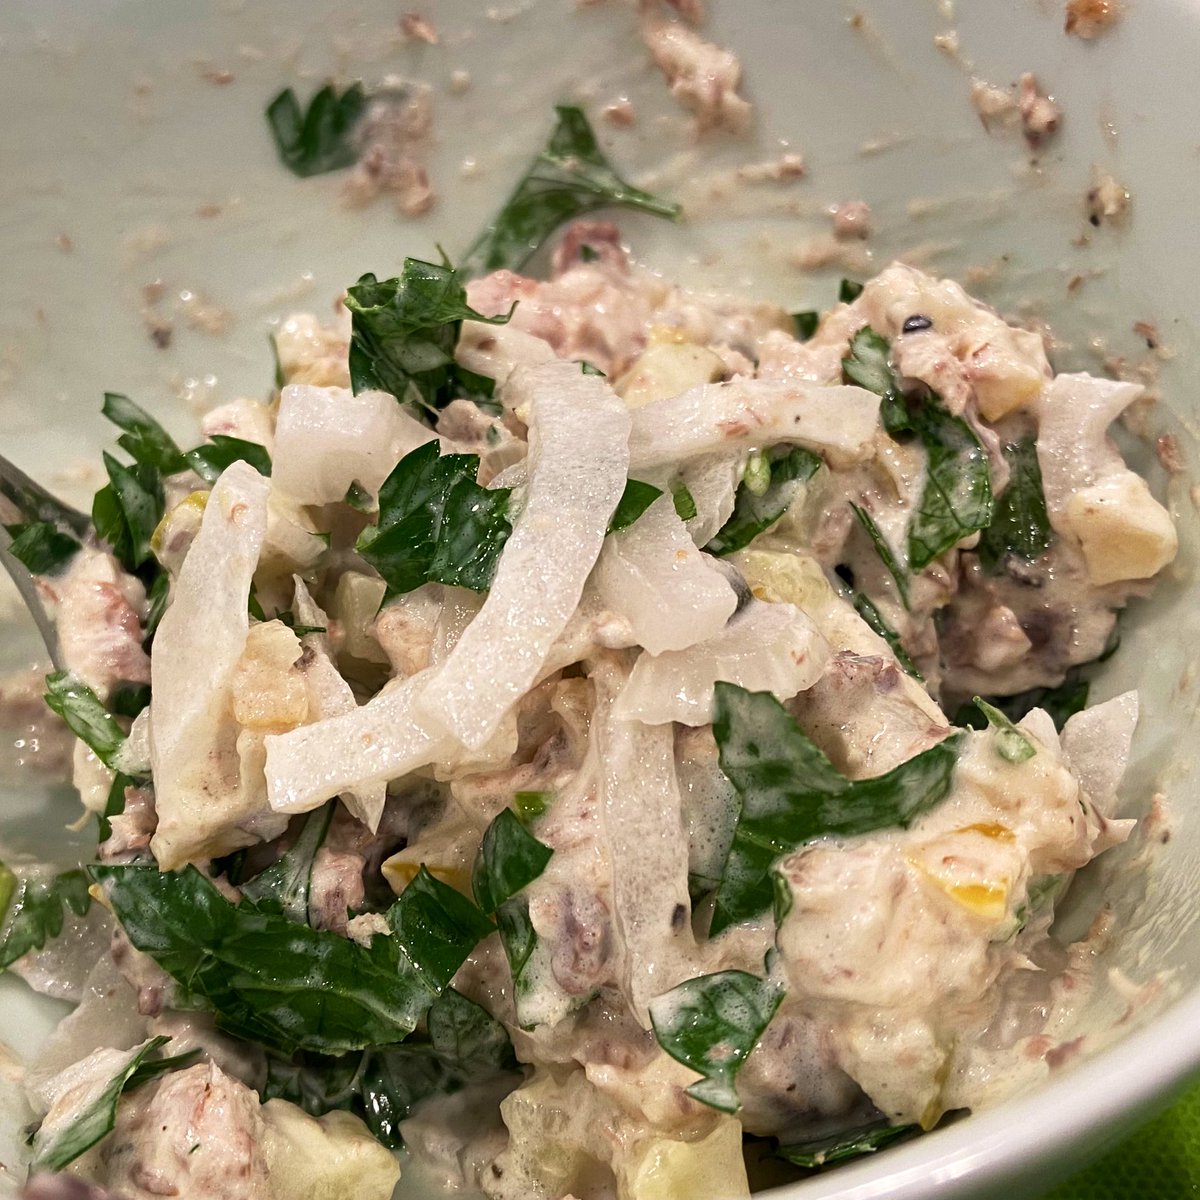 Add some chopped parsley and mix well together, but don’t break up the sardines too much.